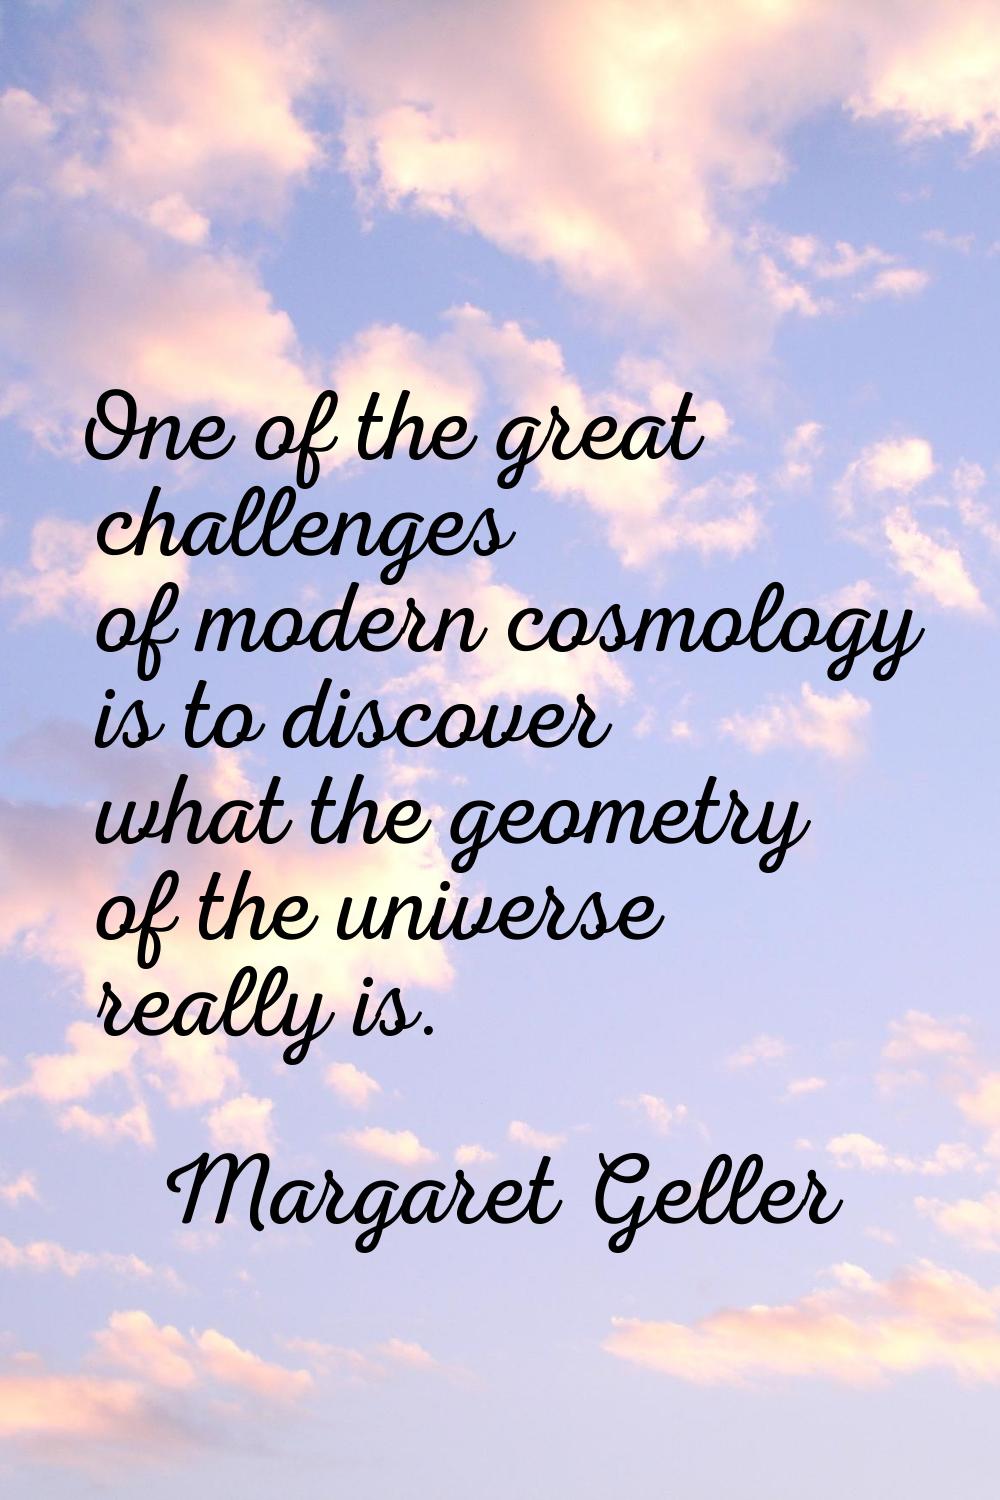 One of the great challenges of modern cosmology is to discover what the geometry of the universe re